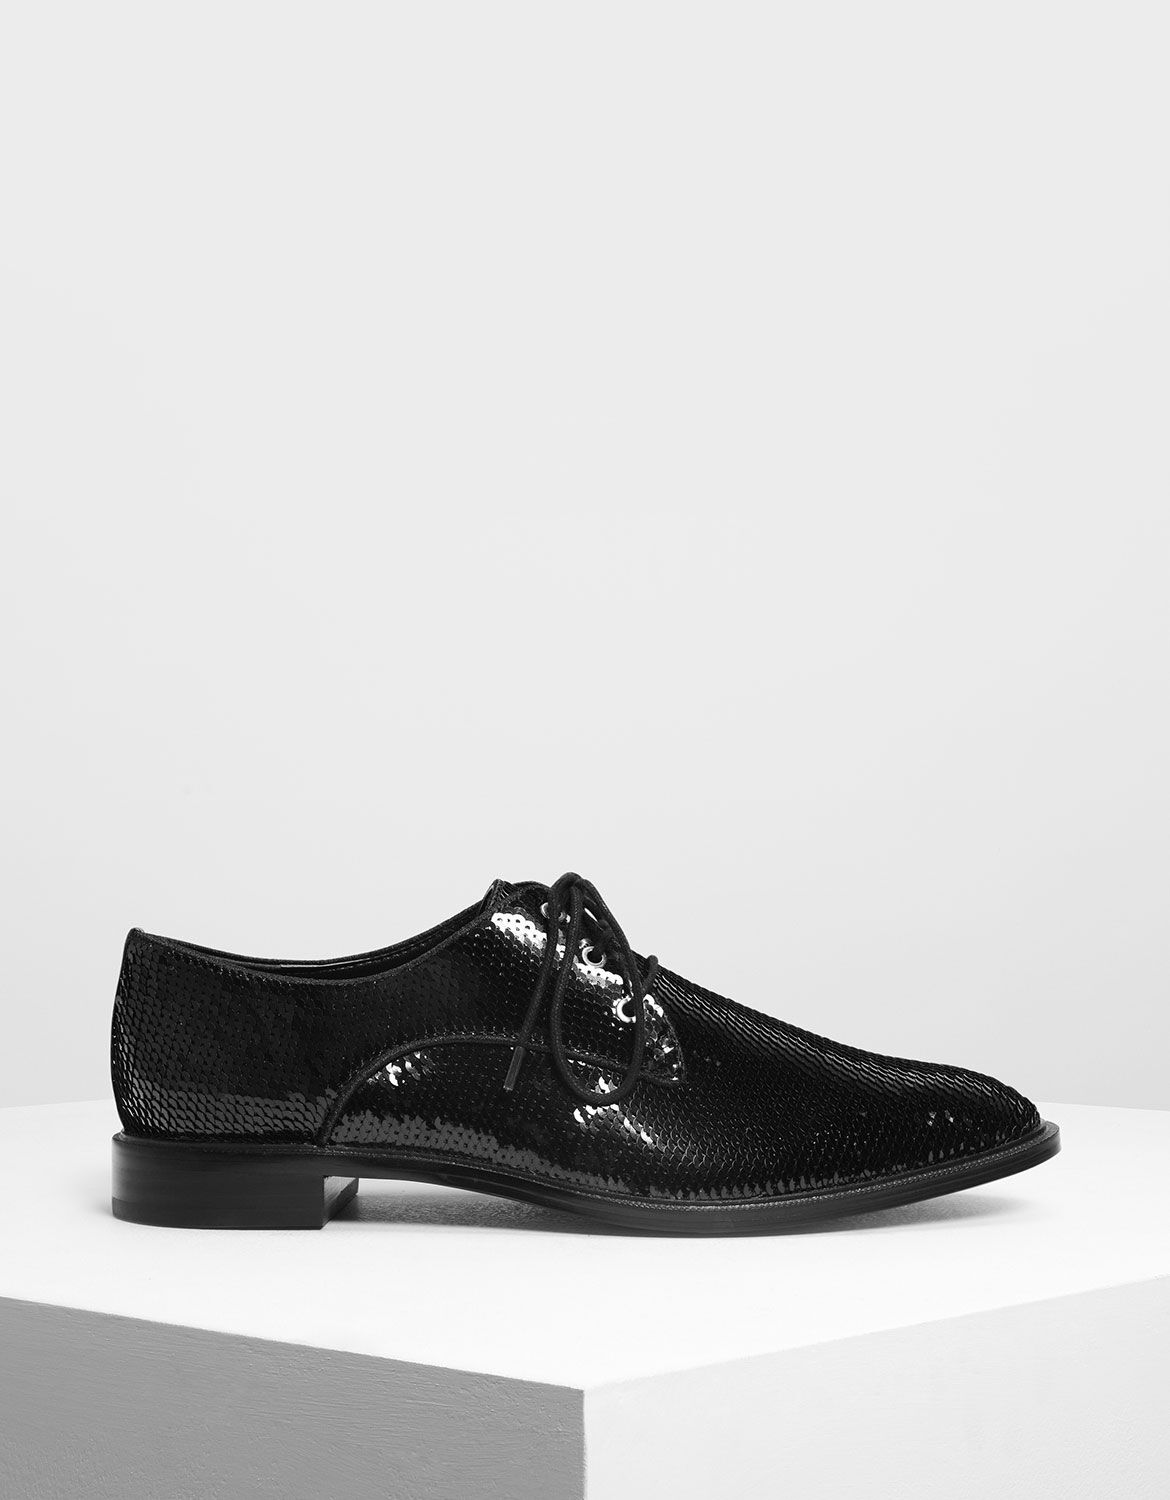 Sequin Derby Shoes - CHARLES \u0026 KEITH SG